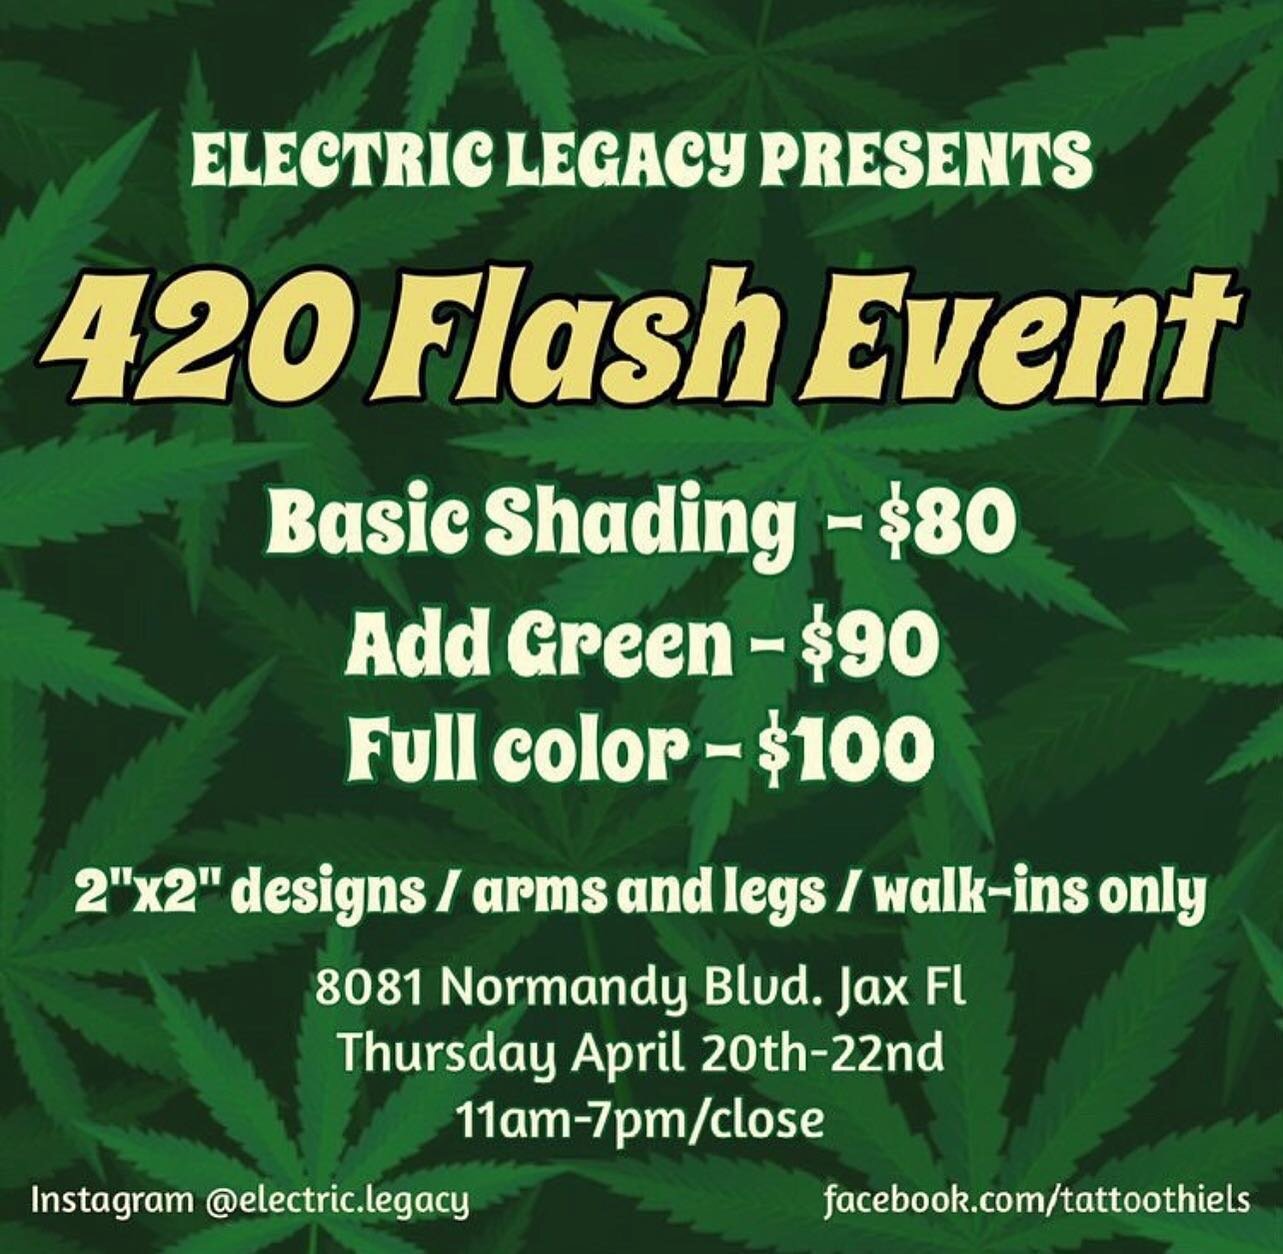 Electric legacy tattoo will be hosting 420 flash event 

April 20-22nd 11am-7pm
8081 Normandy Blvd suite 4 Jax Fl

Prices start at 4 twenties ($80) for black and grey/ $90 with green/ $100 full color 

2x2 inch designs, no changes

Arms and legs only